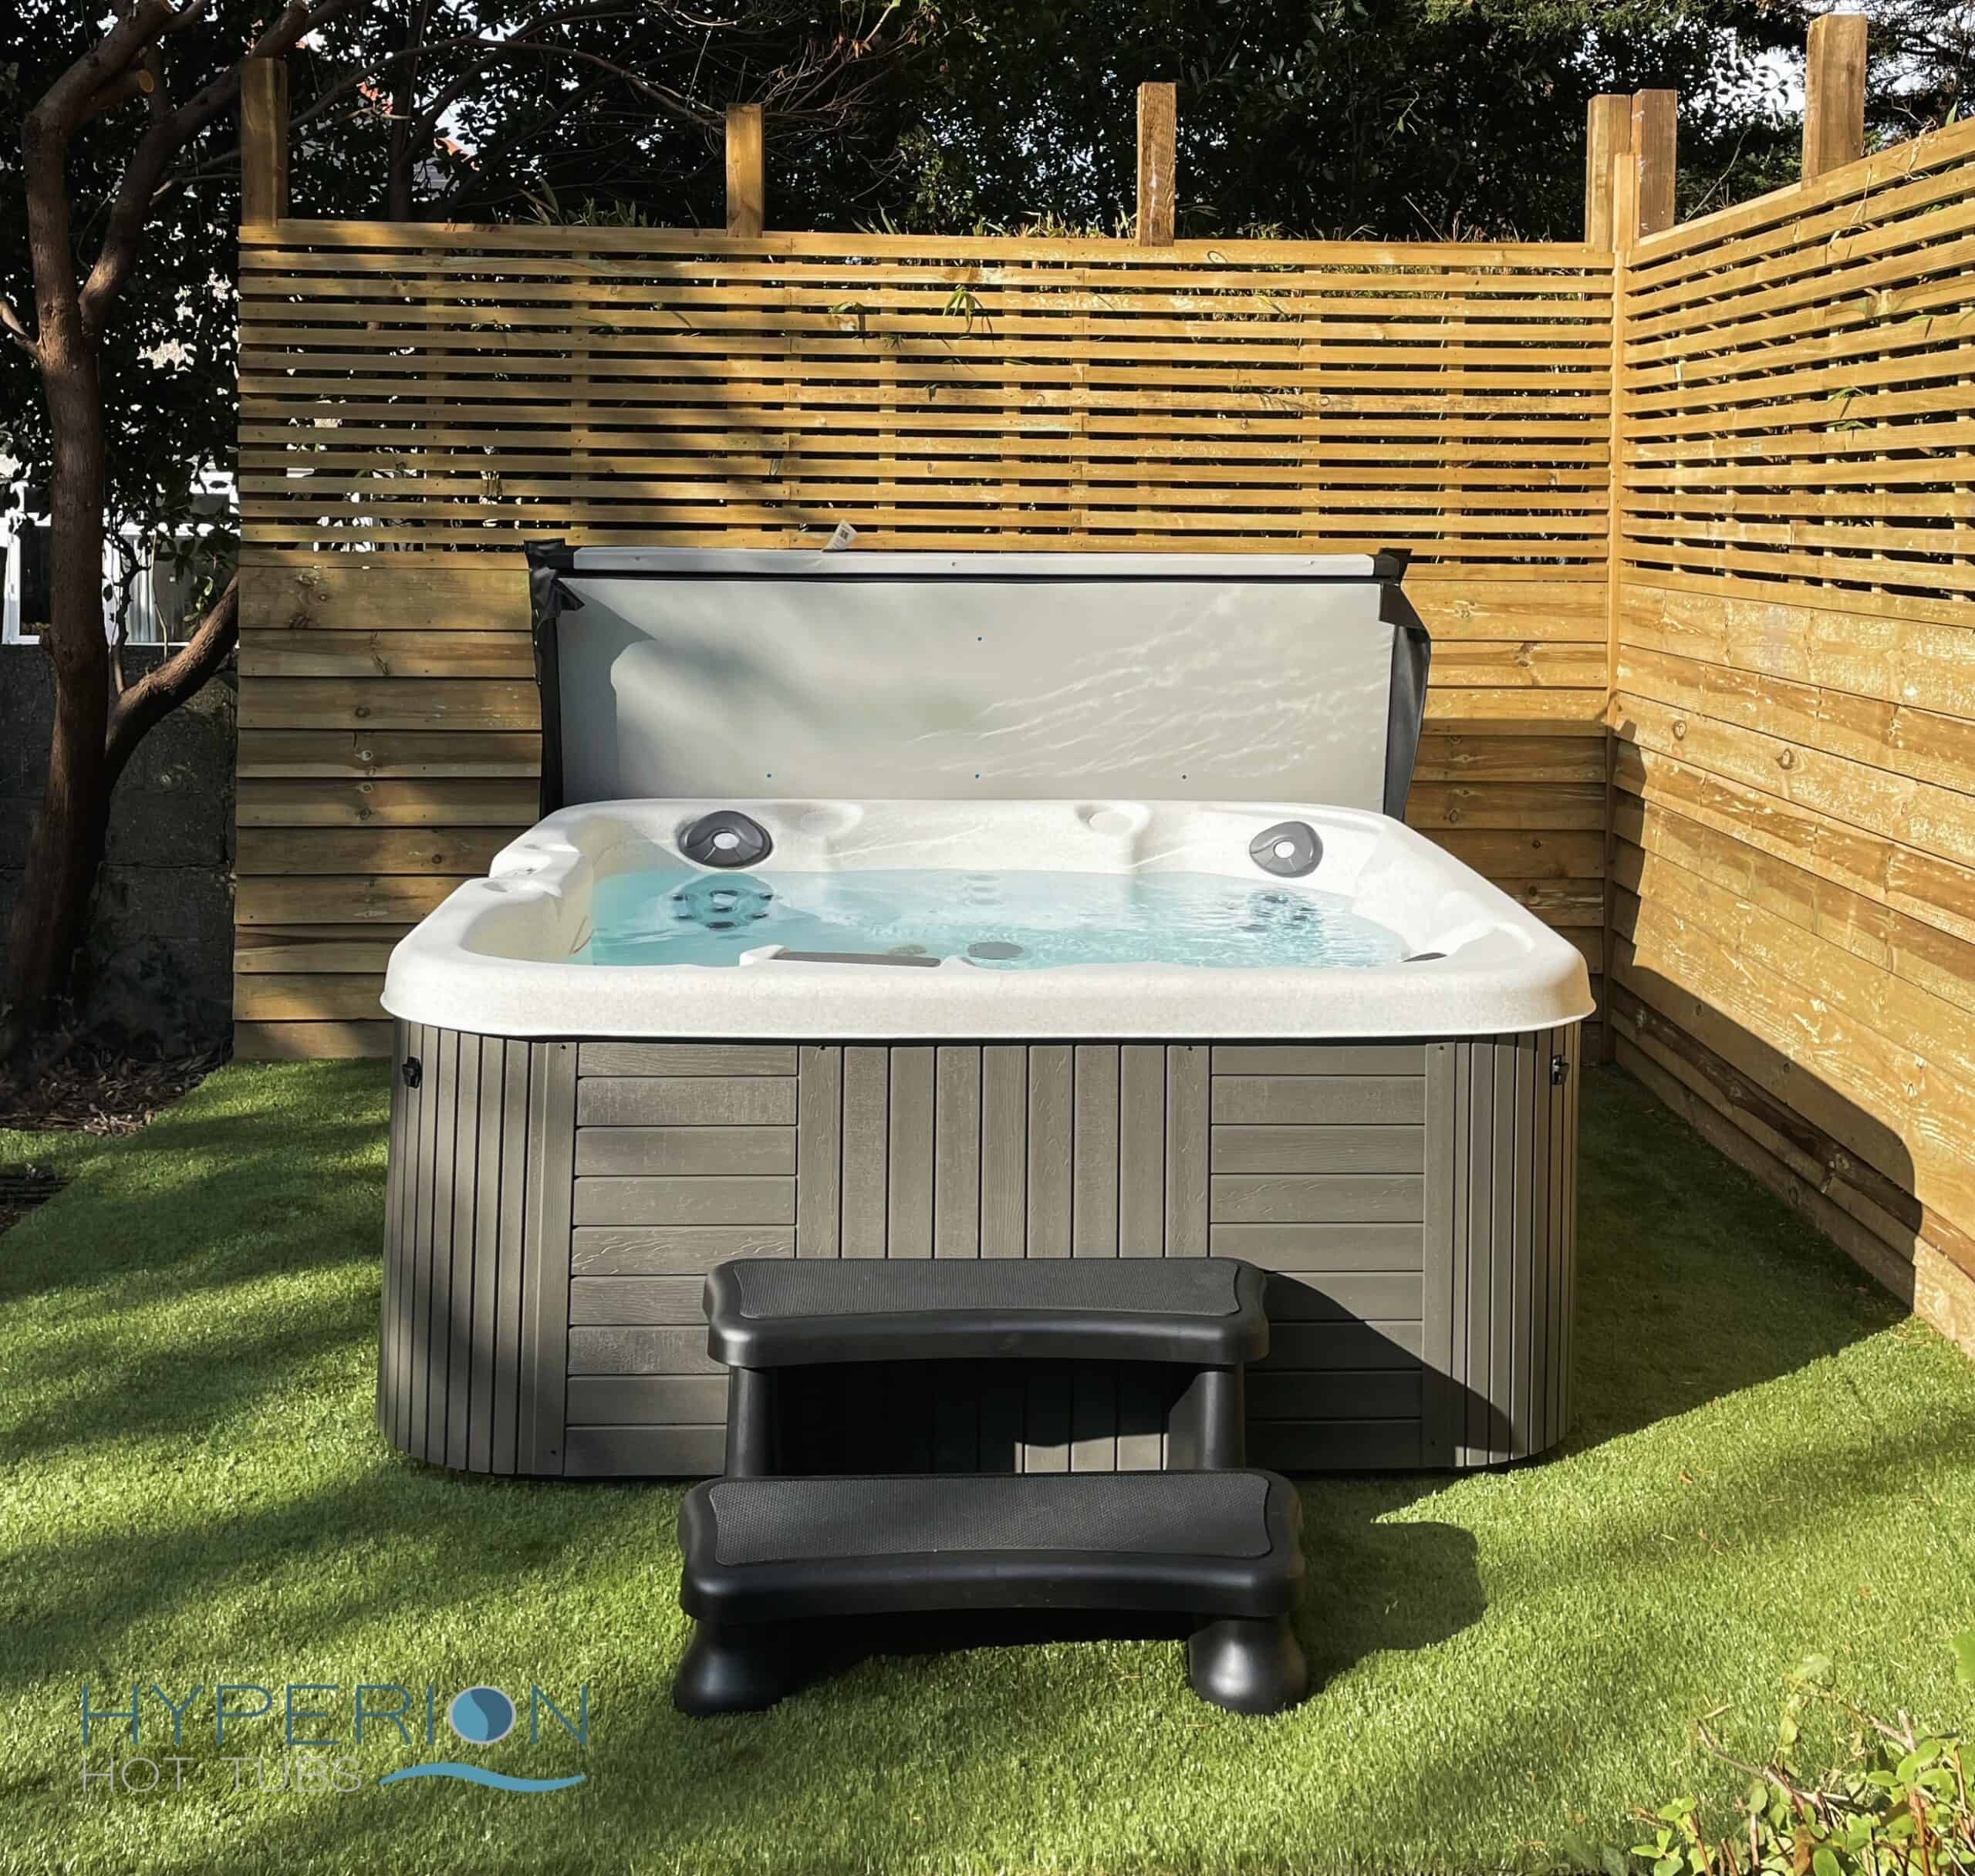 Hot tub installation in Bournemouth, carried out by Hyperion Hot Tubs.